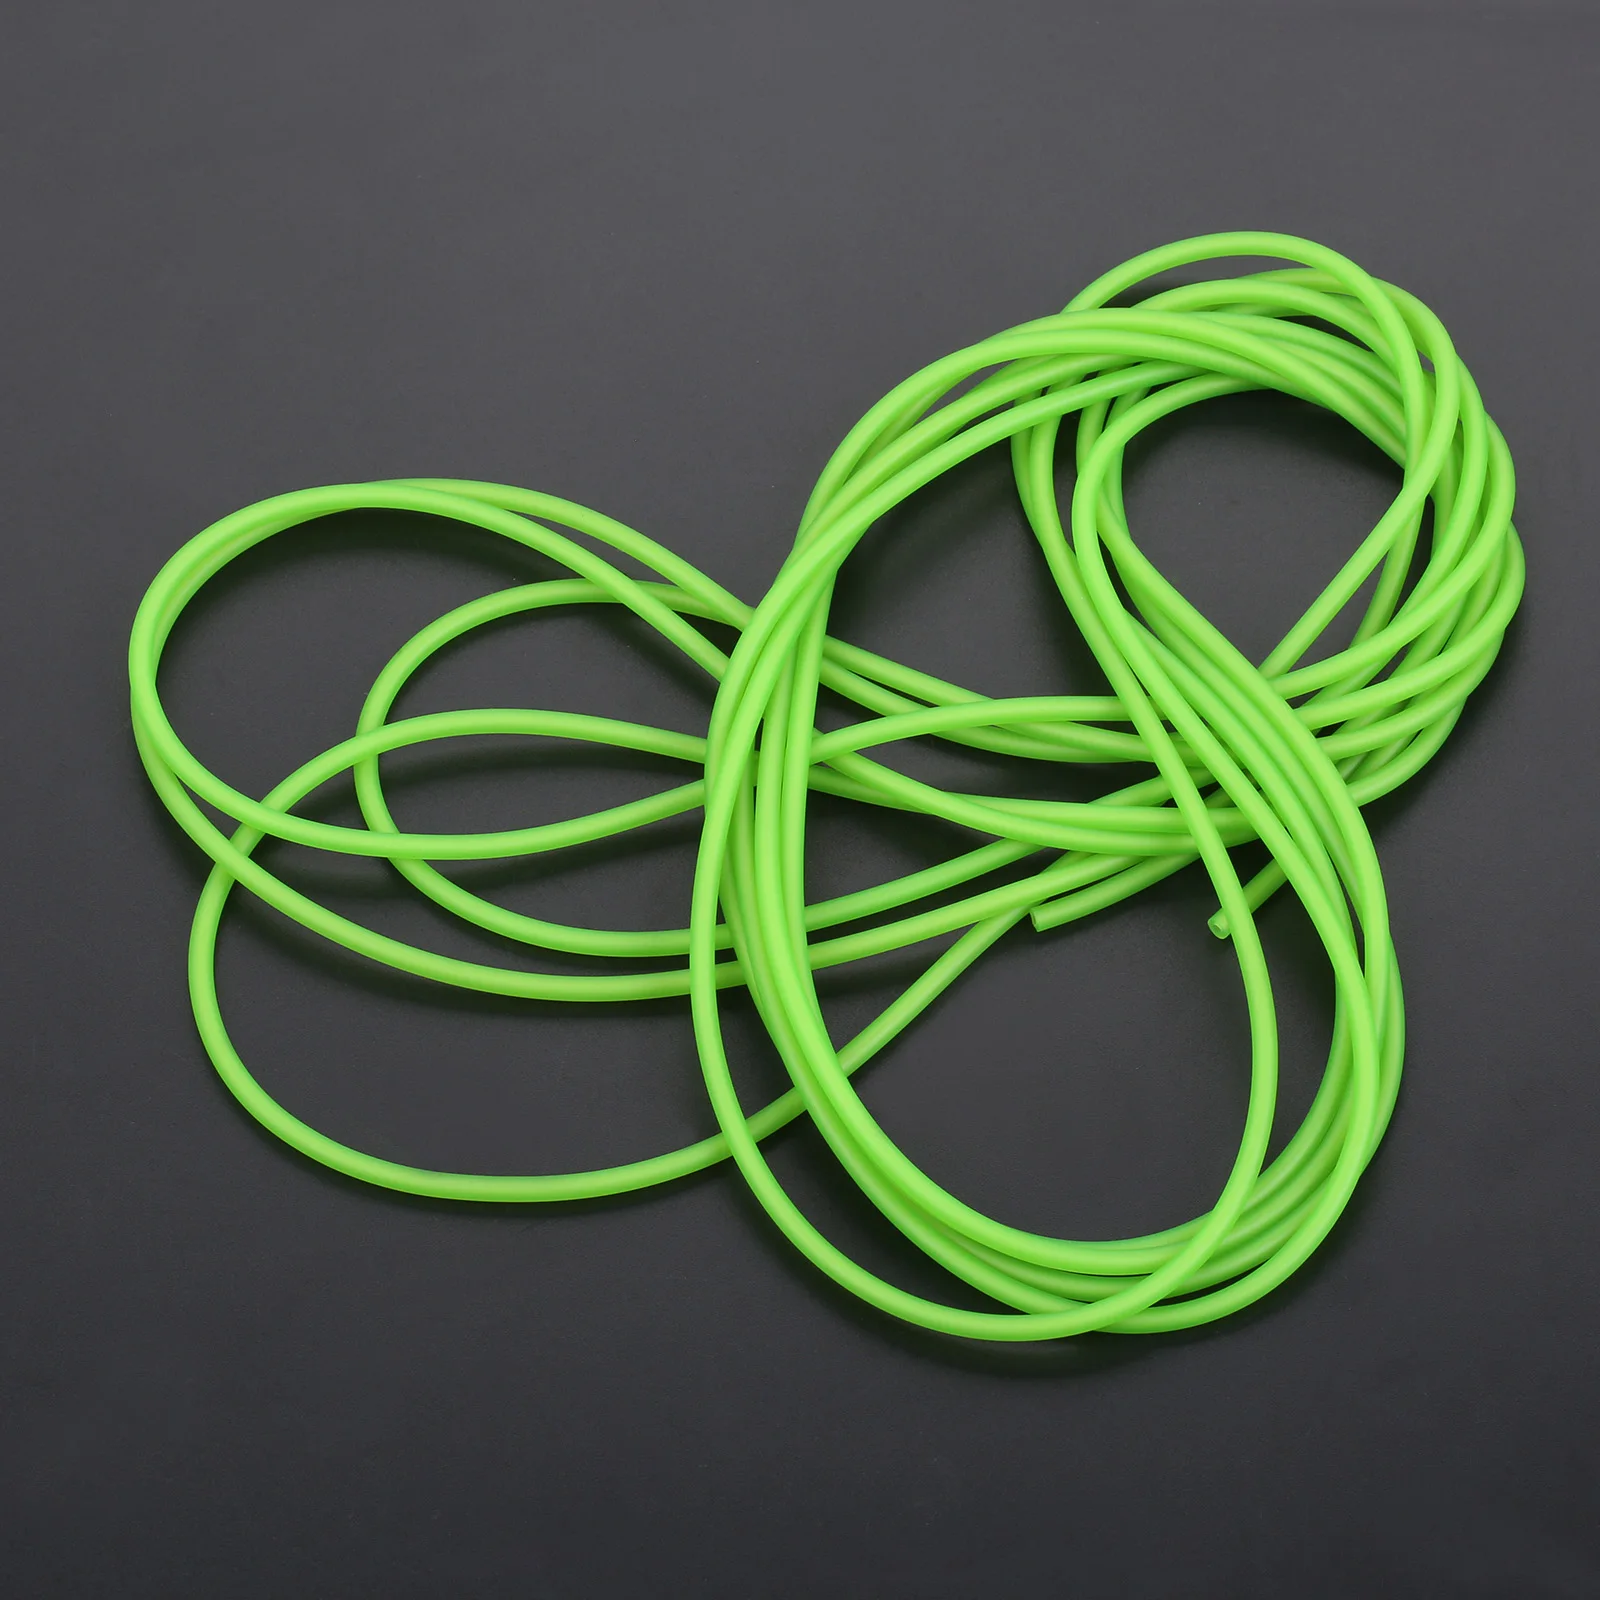 Hunting Sporting 5M Strong Slingshot Natural Latex Tube Catapult Sling Shot Rubber Band Green Elastic Bungee Tube 1.6x3.6mm images - 6